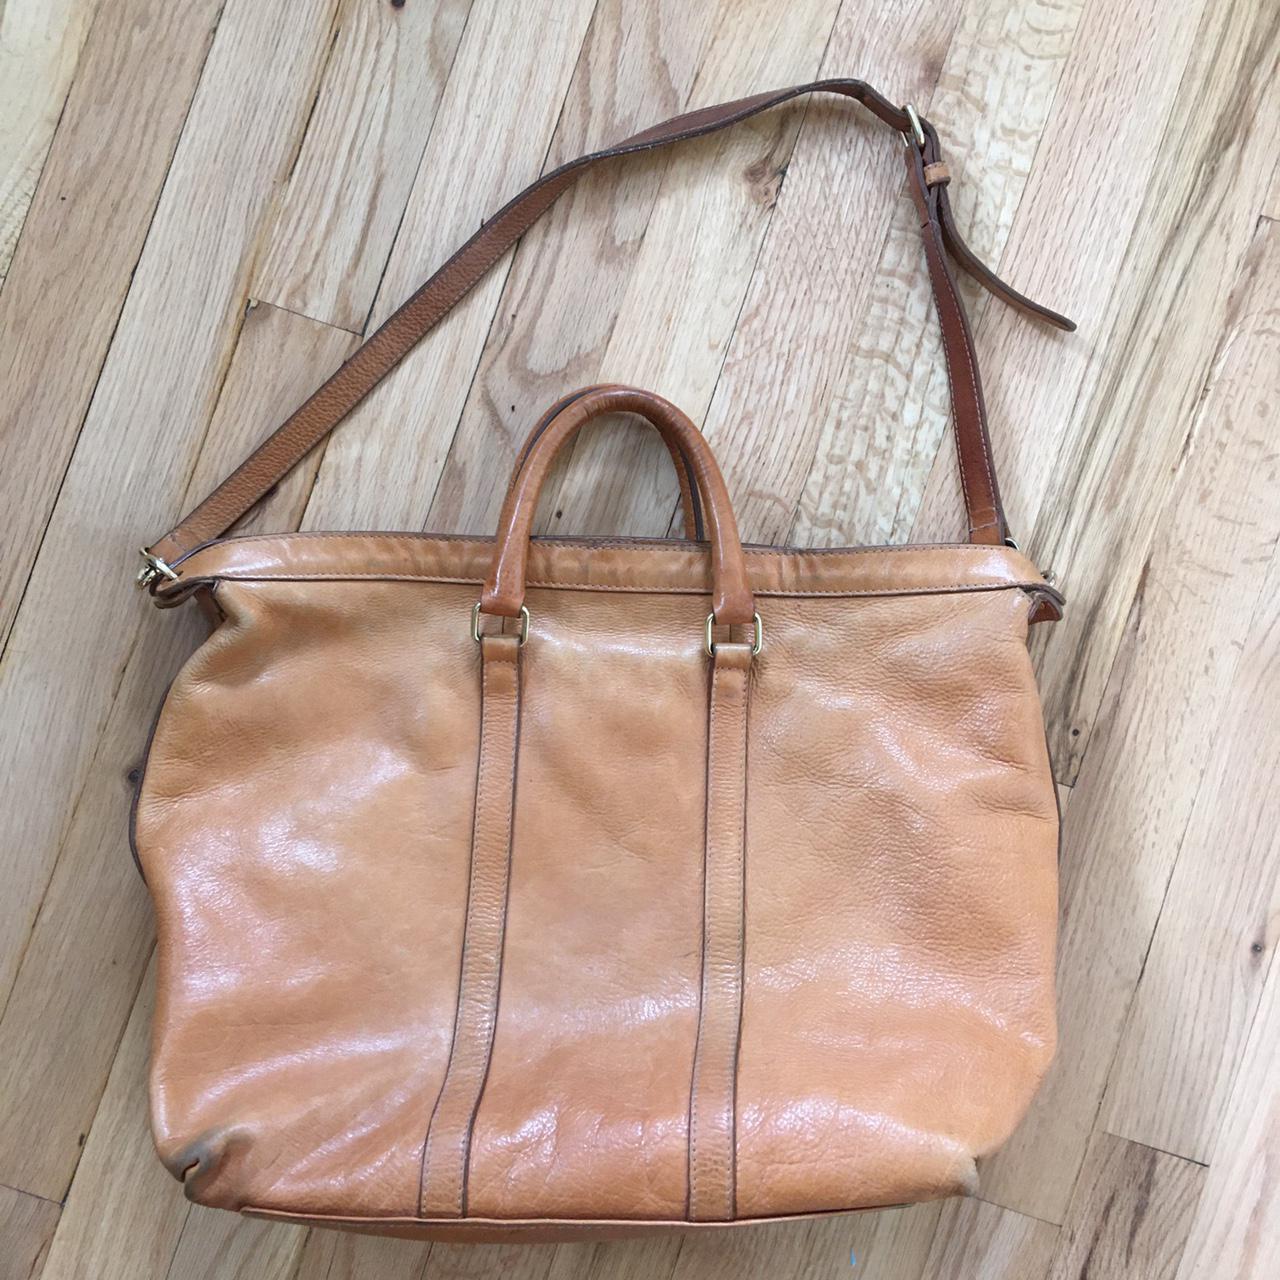 Bimba Y Lola bag. Never used. Perfect condition. - Depop